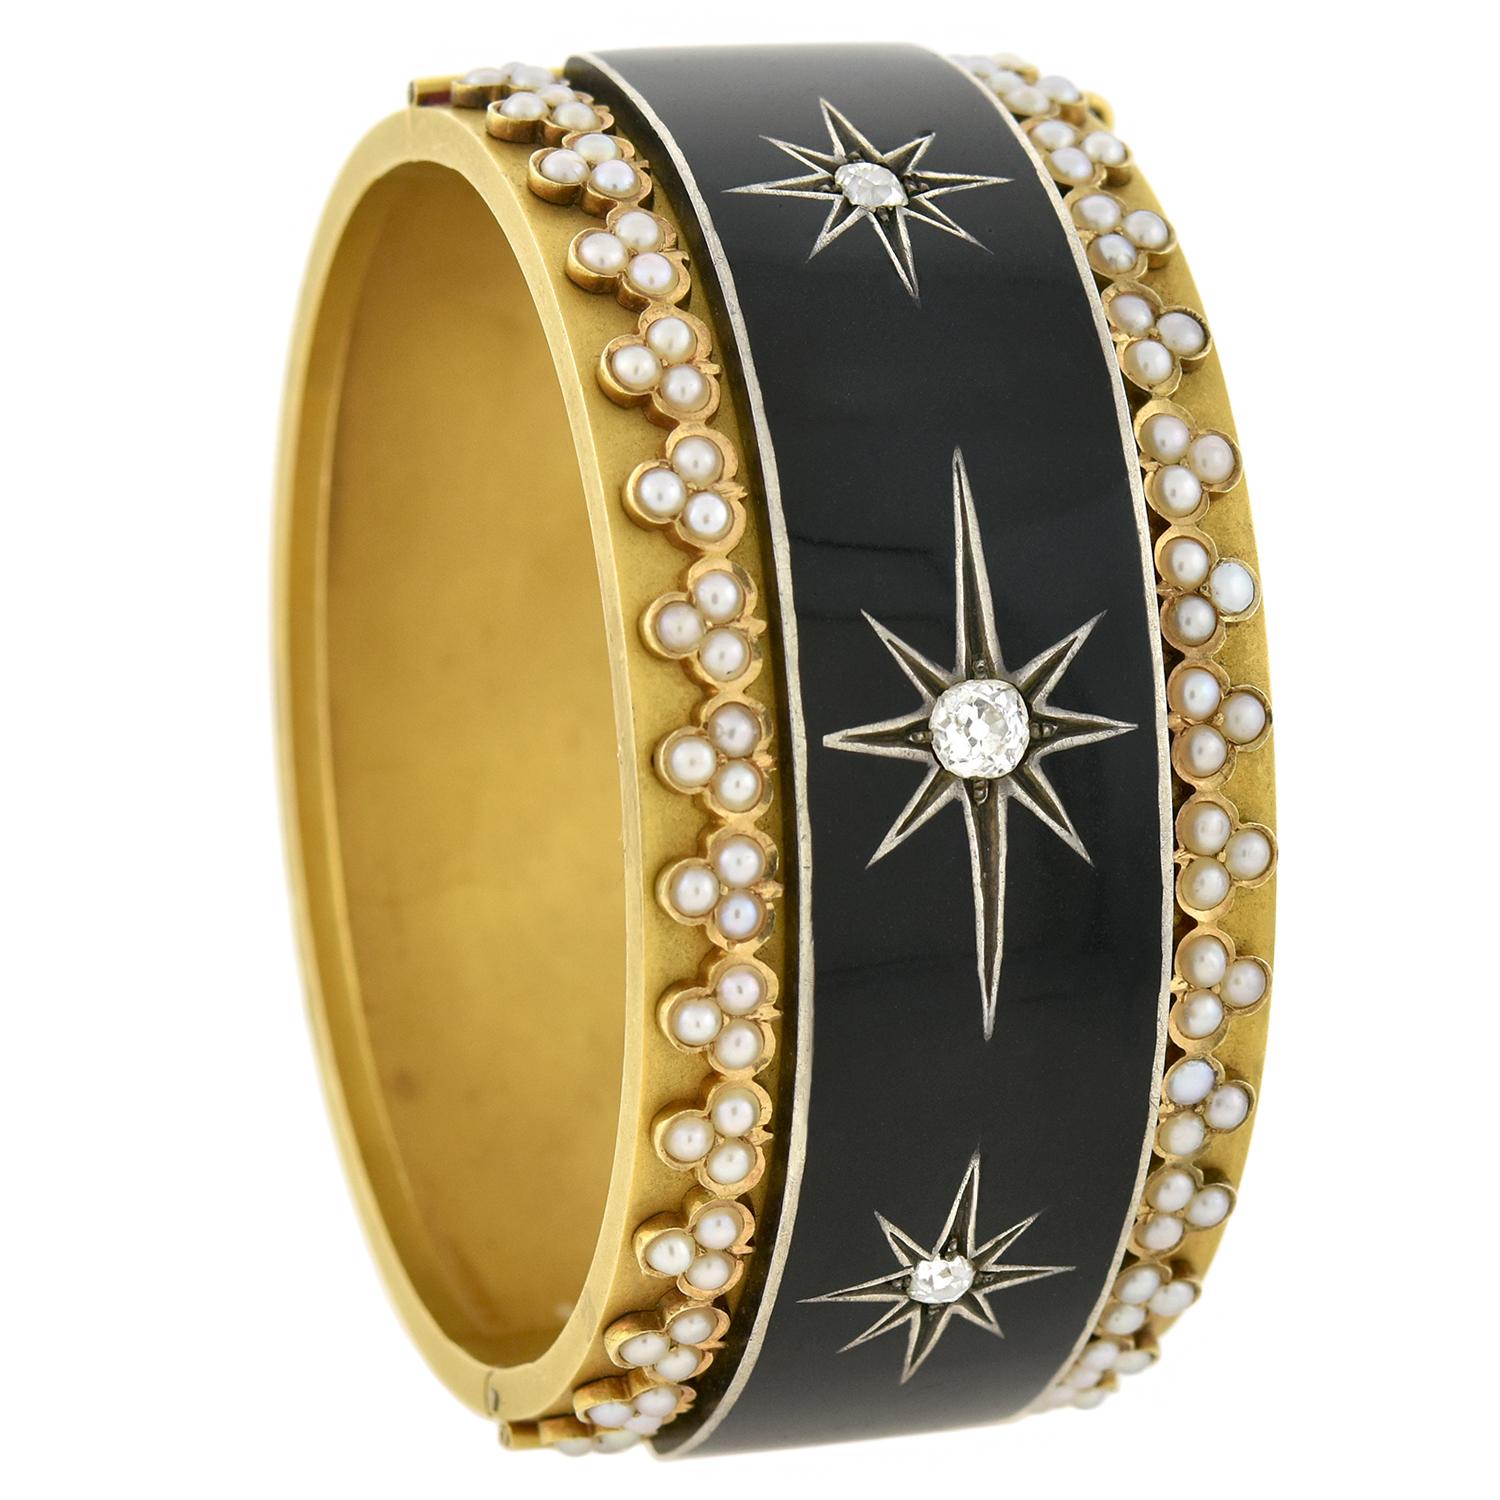 Victorian Yellow Gold Enameled Diamond and Pearl Starburst Motif Bangle Bracelet For Sale 1